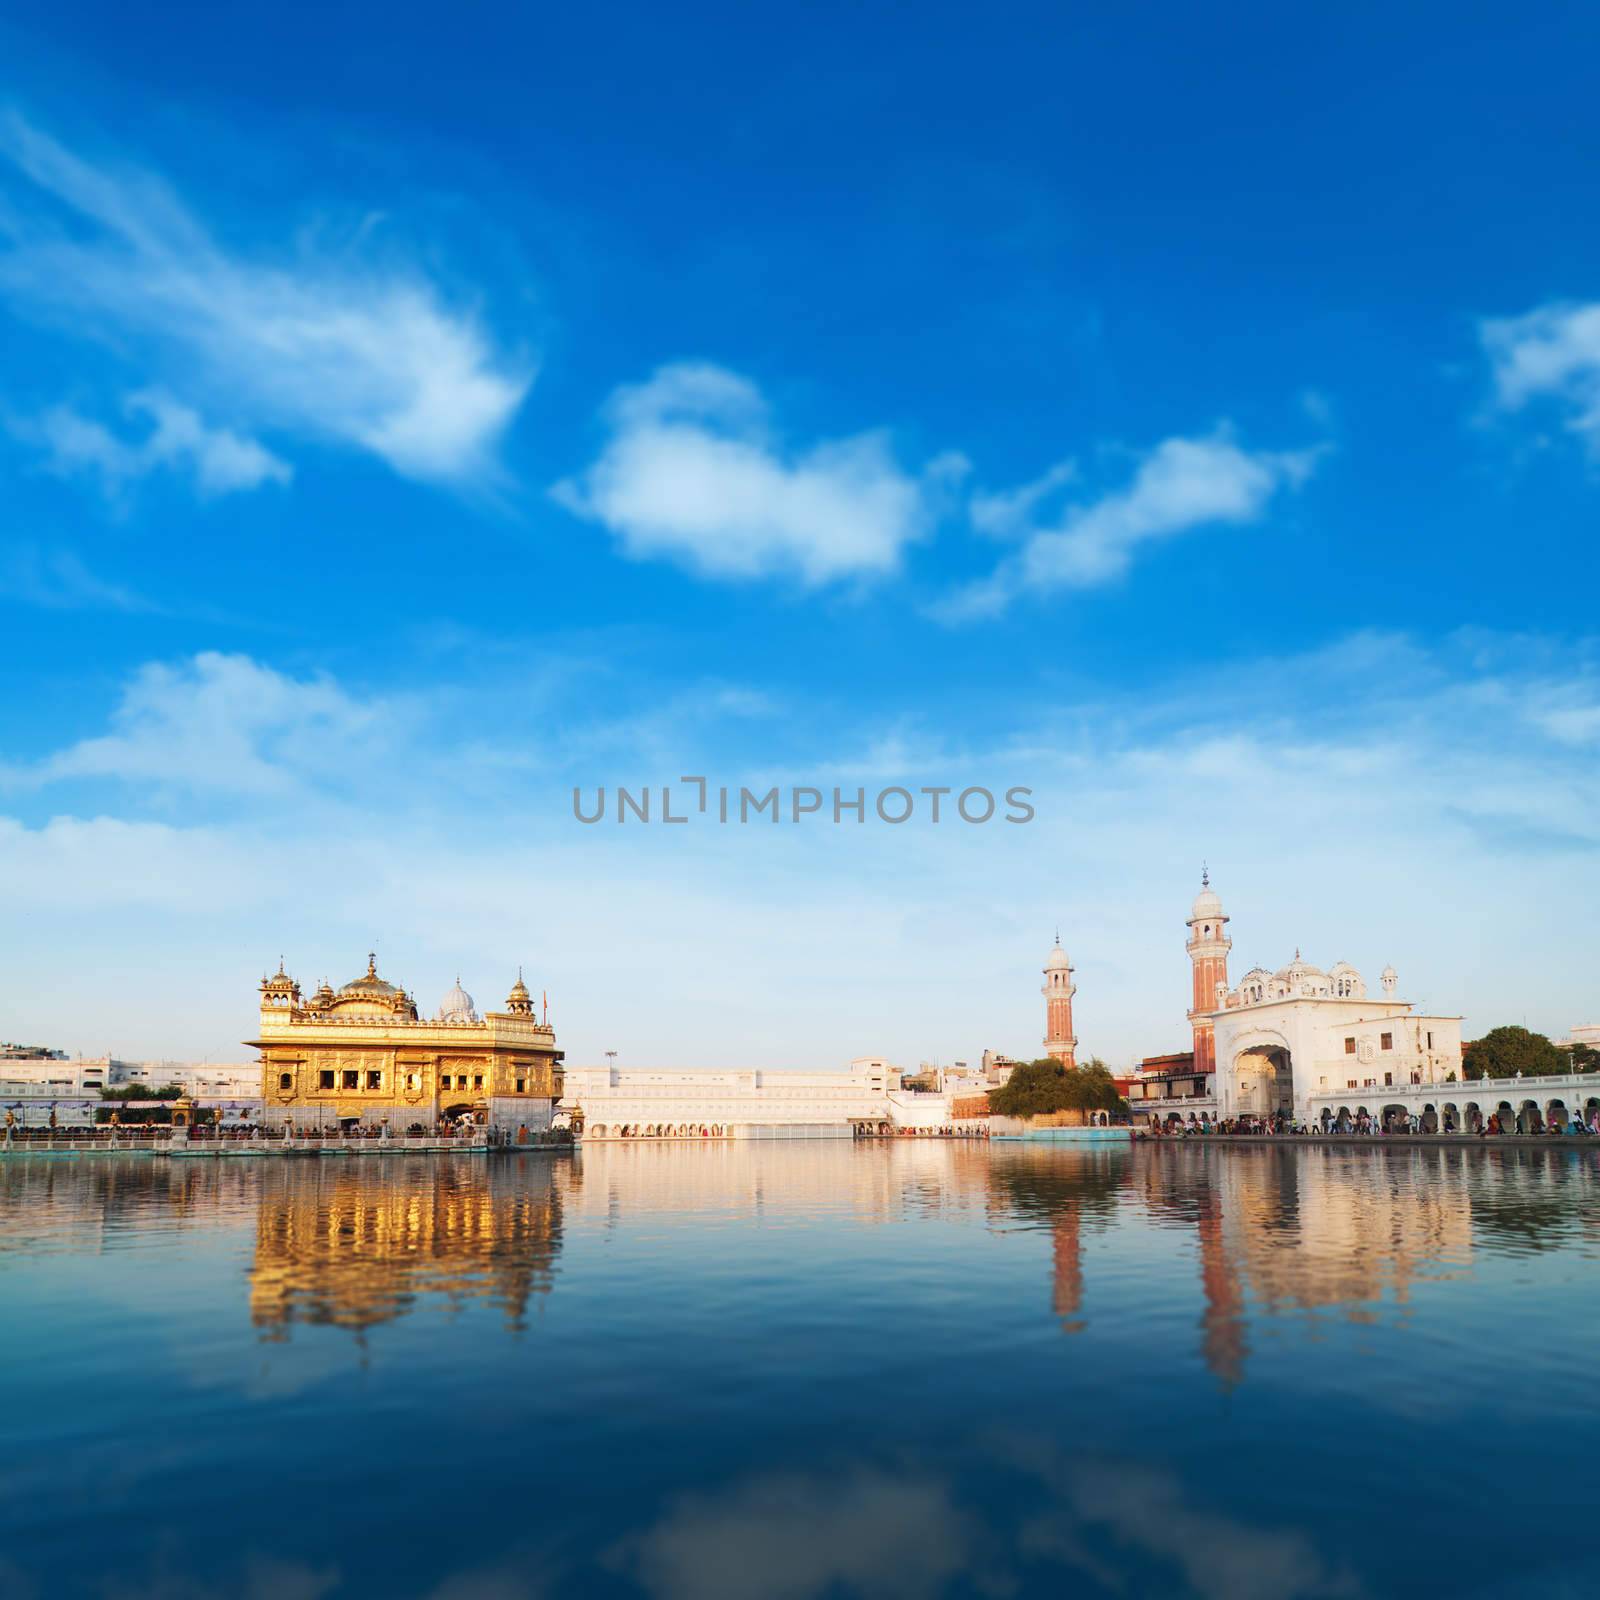 Golden Temple India daytime by szefei